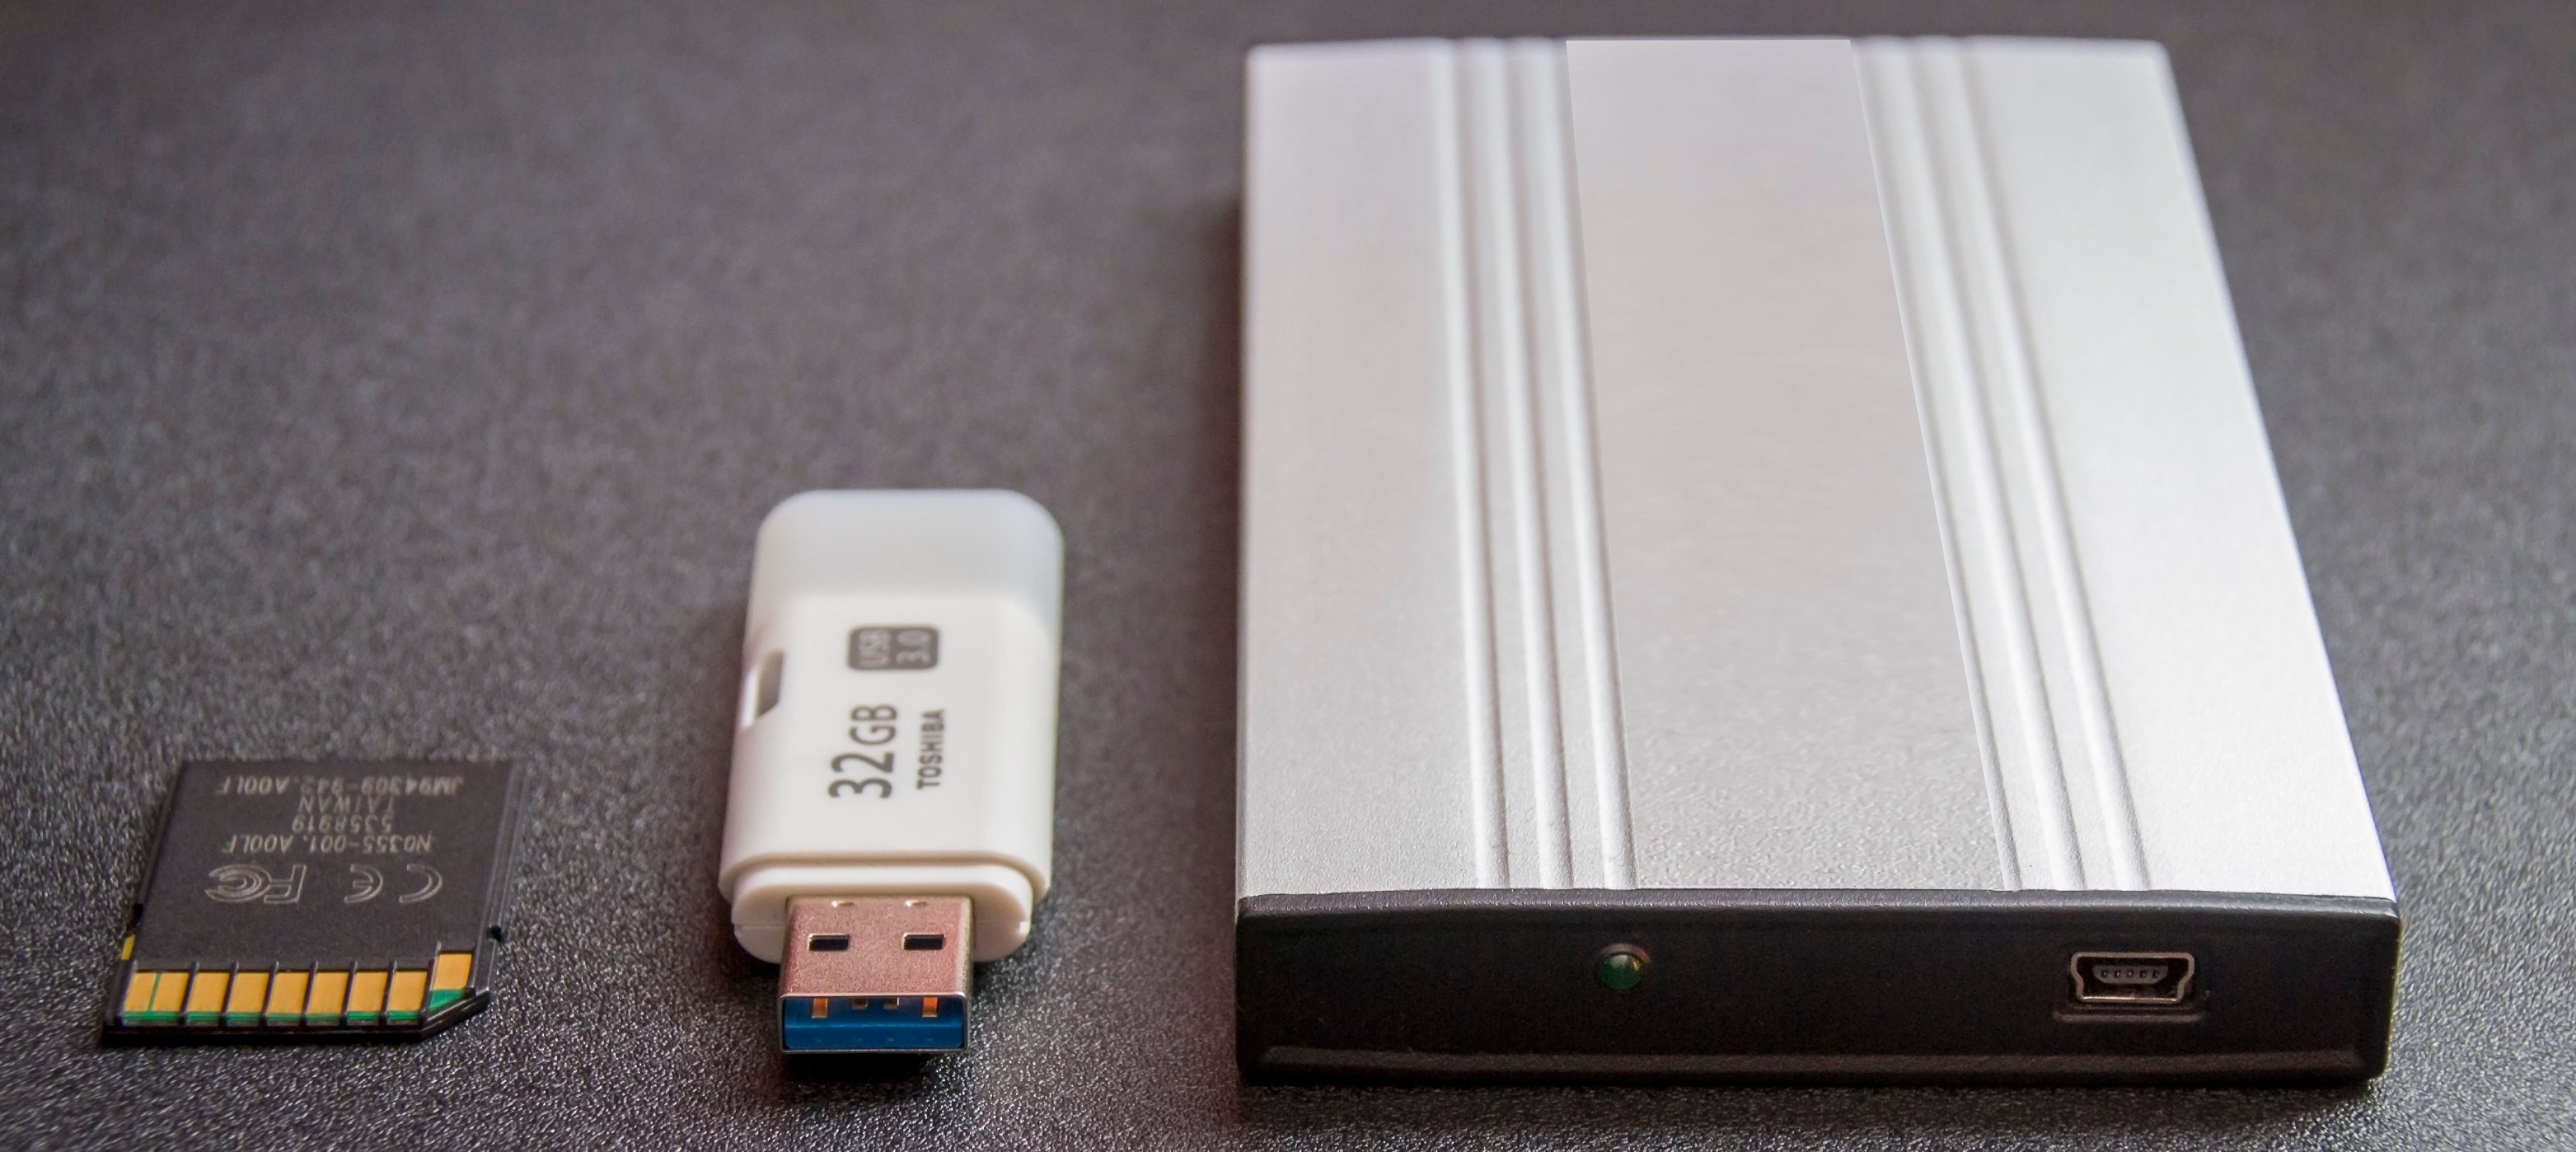 How to Recover Data from a USB Drive..